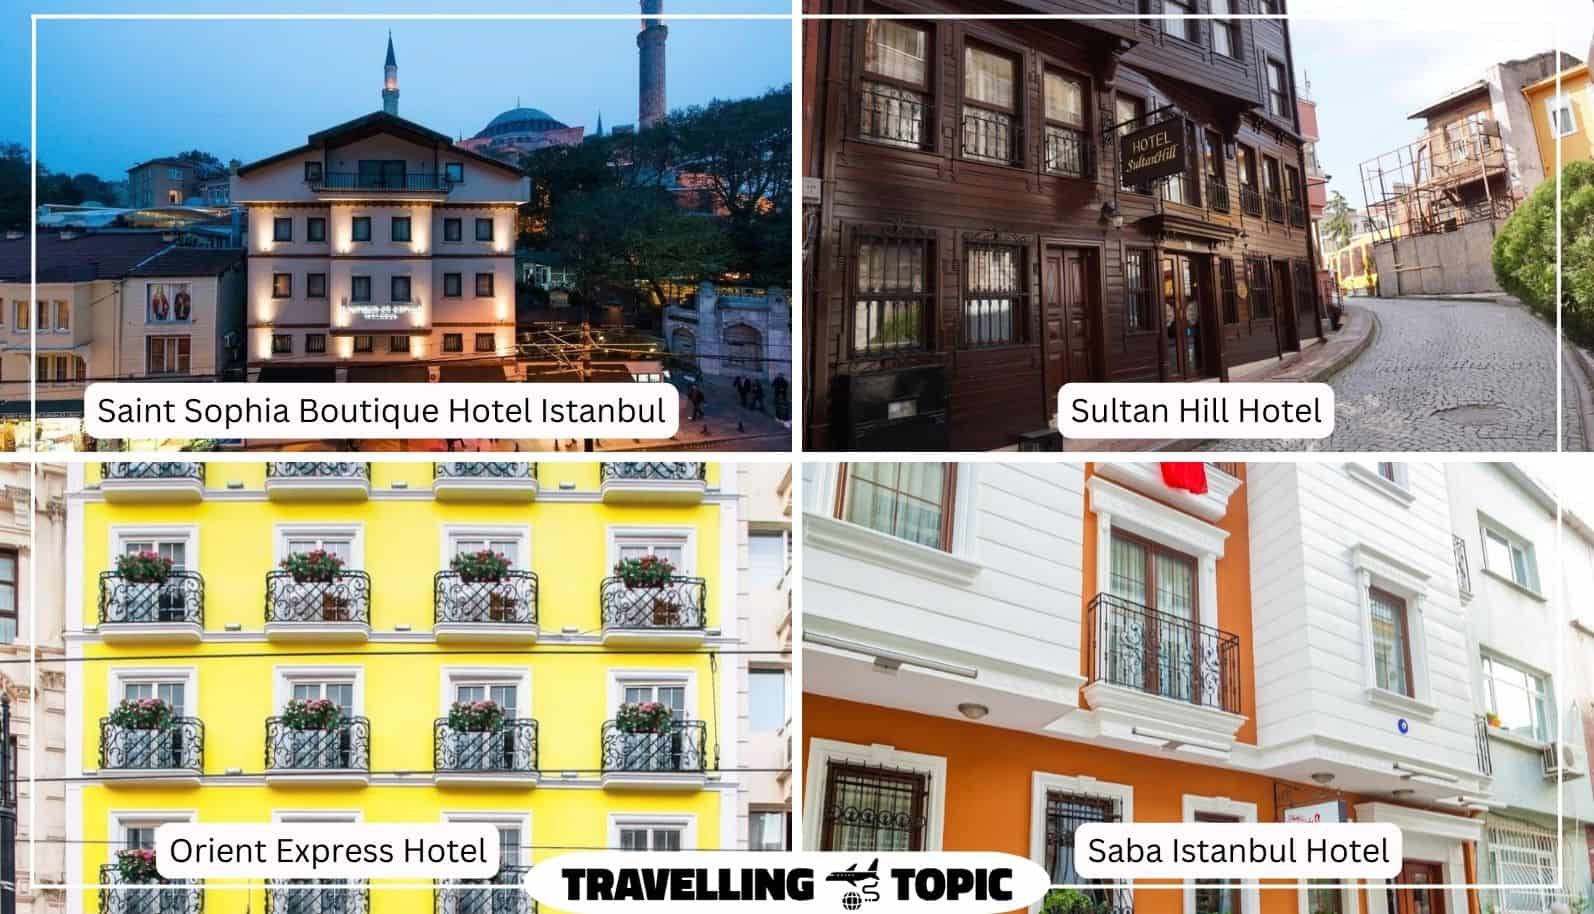 What hotels are there to stay near Hagia Sophia Mosque and Museum